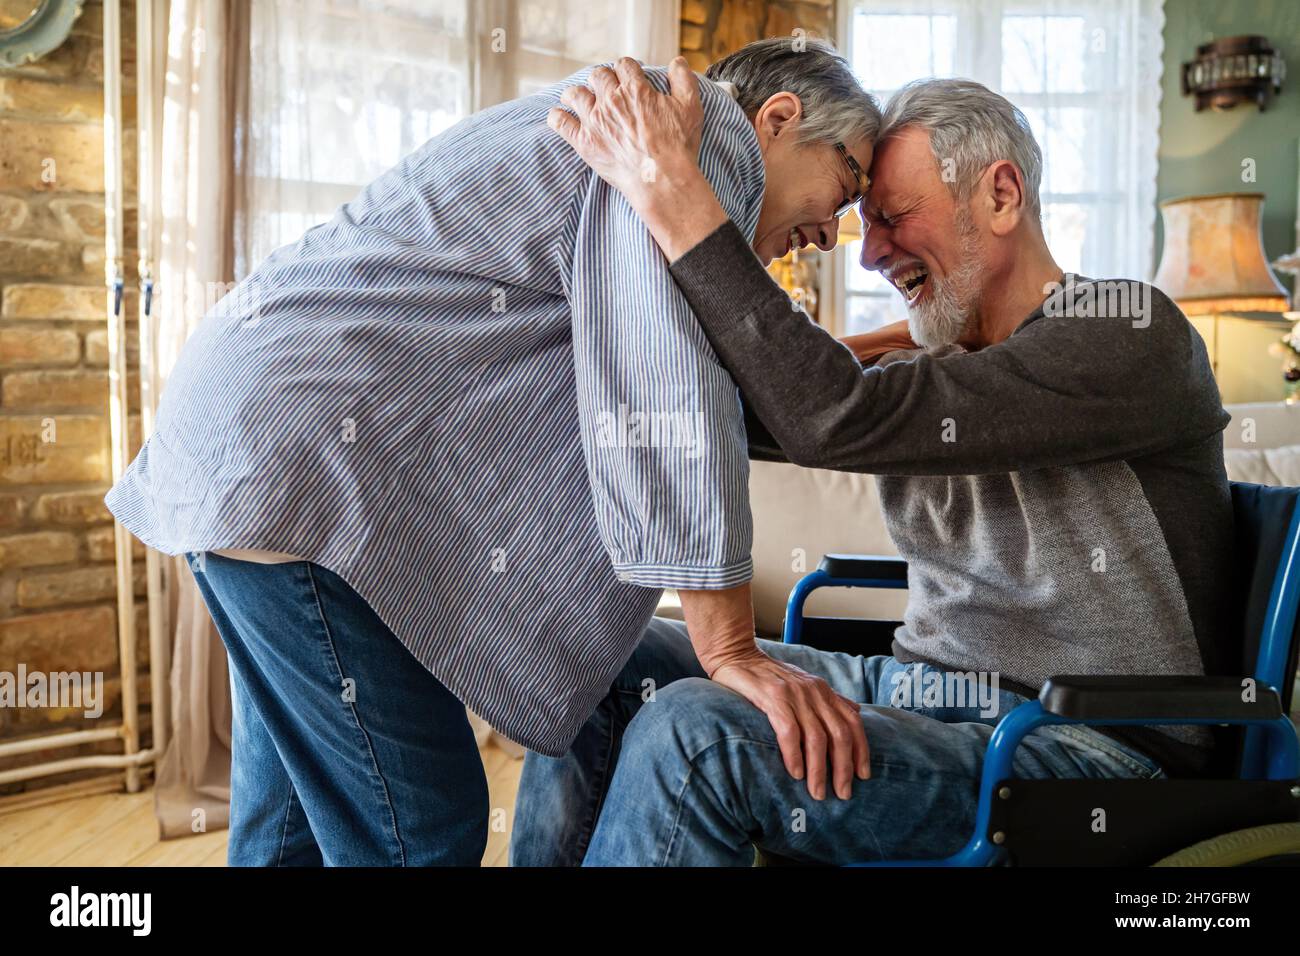 Mature man with disability in wheelchair spending time together with his wife at home Stock Photo